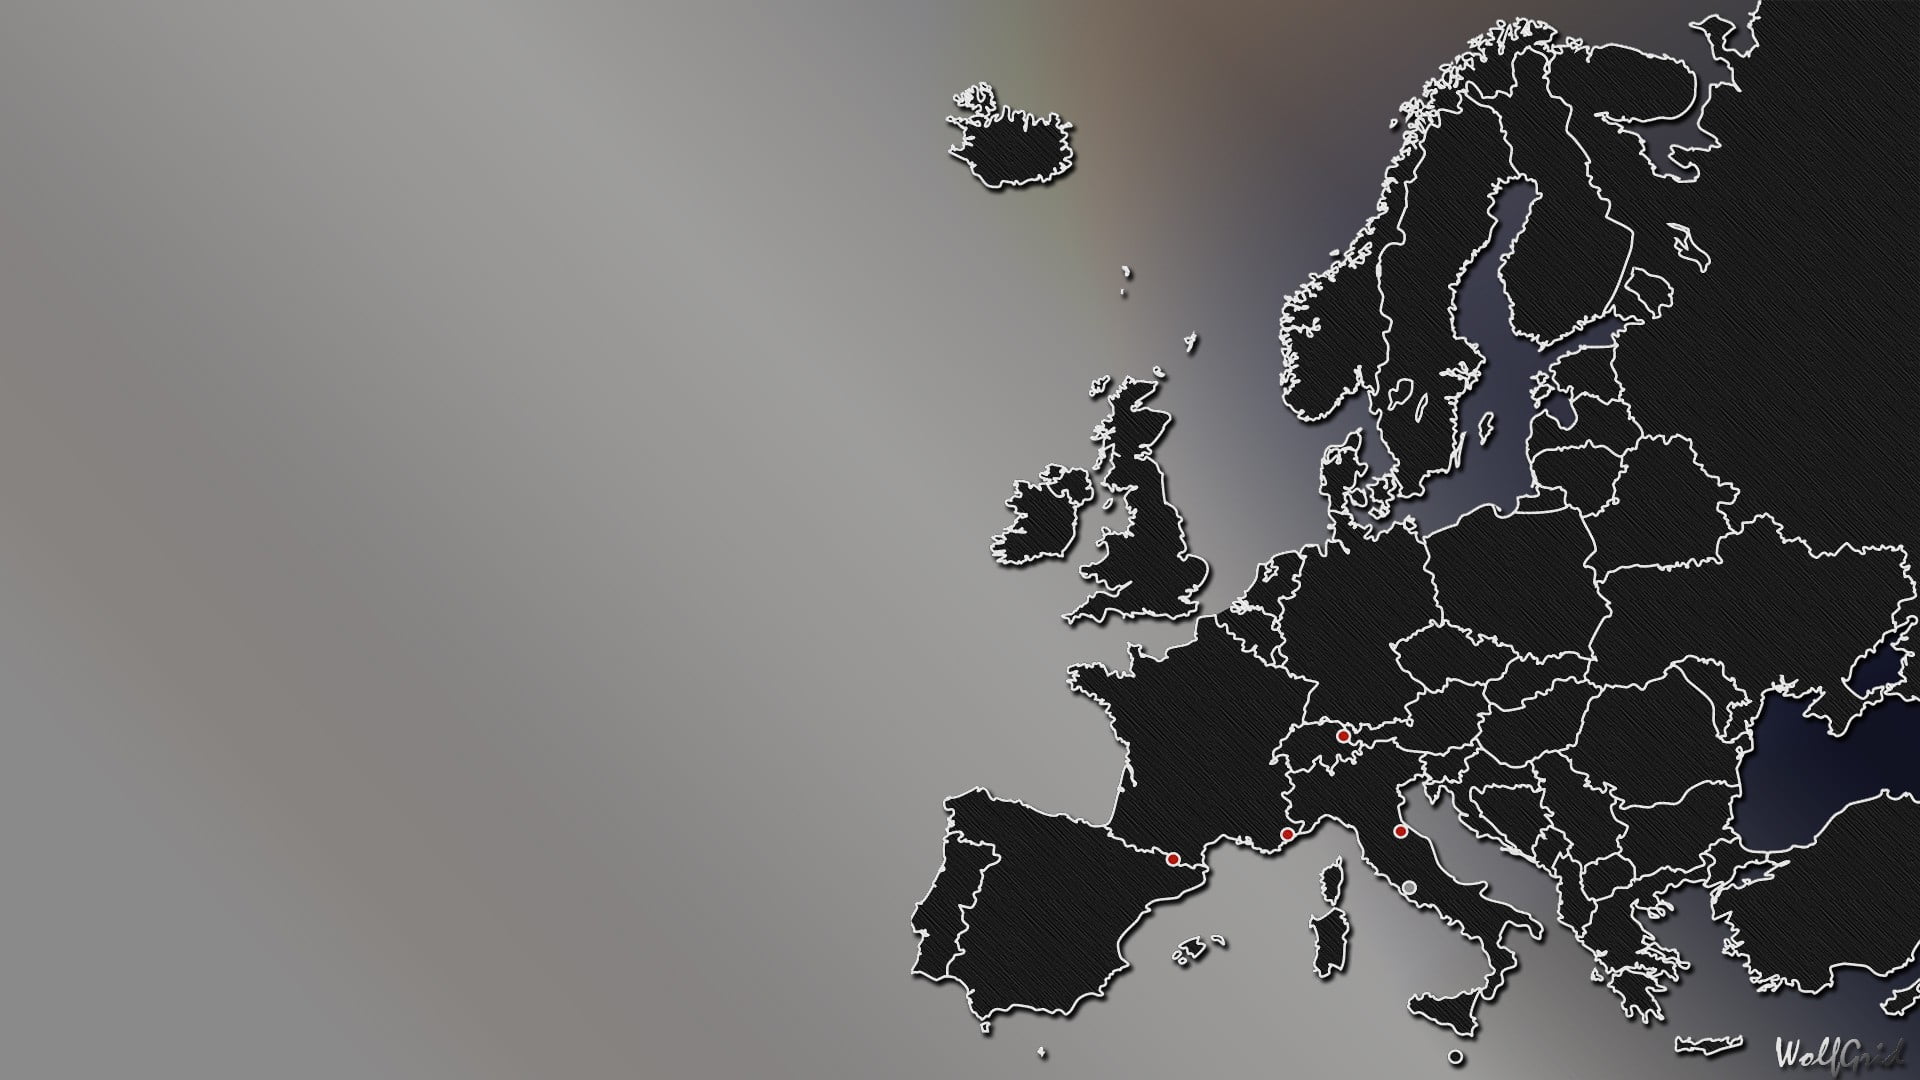 black map photo digital wallpaper, Europe, countries, sky, low angle view